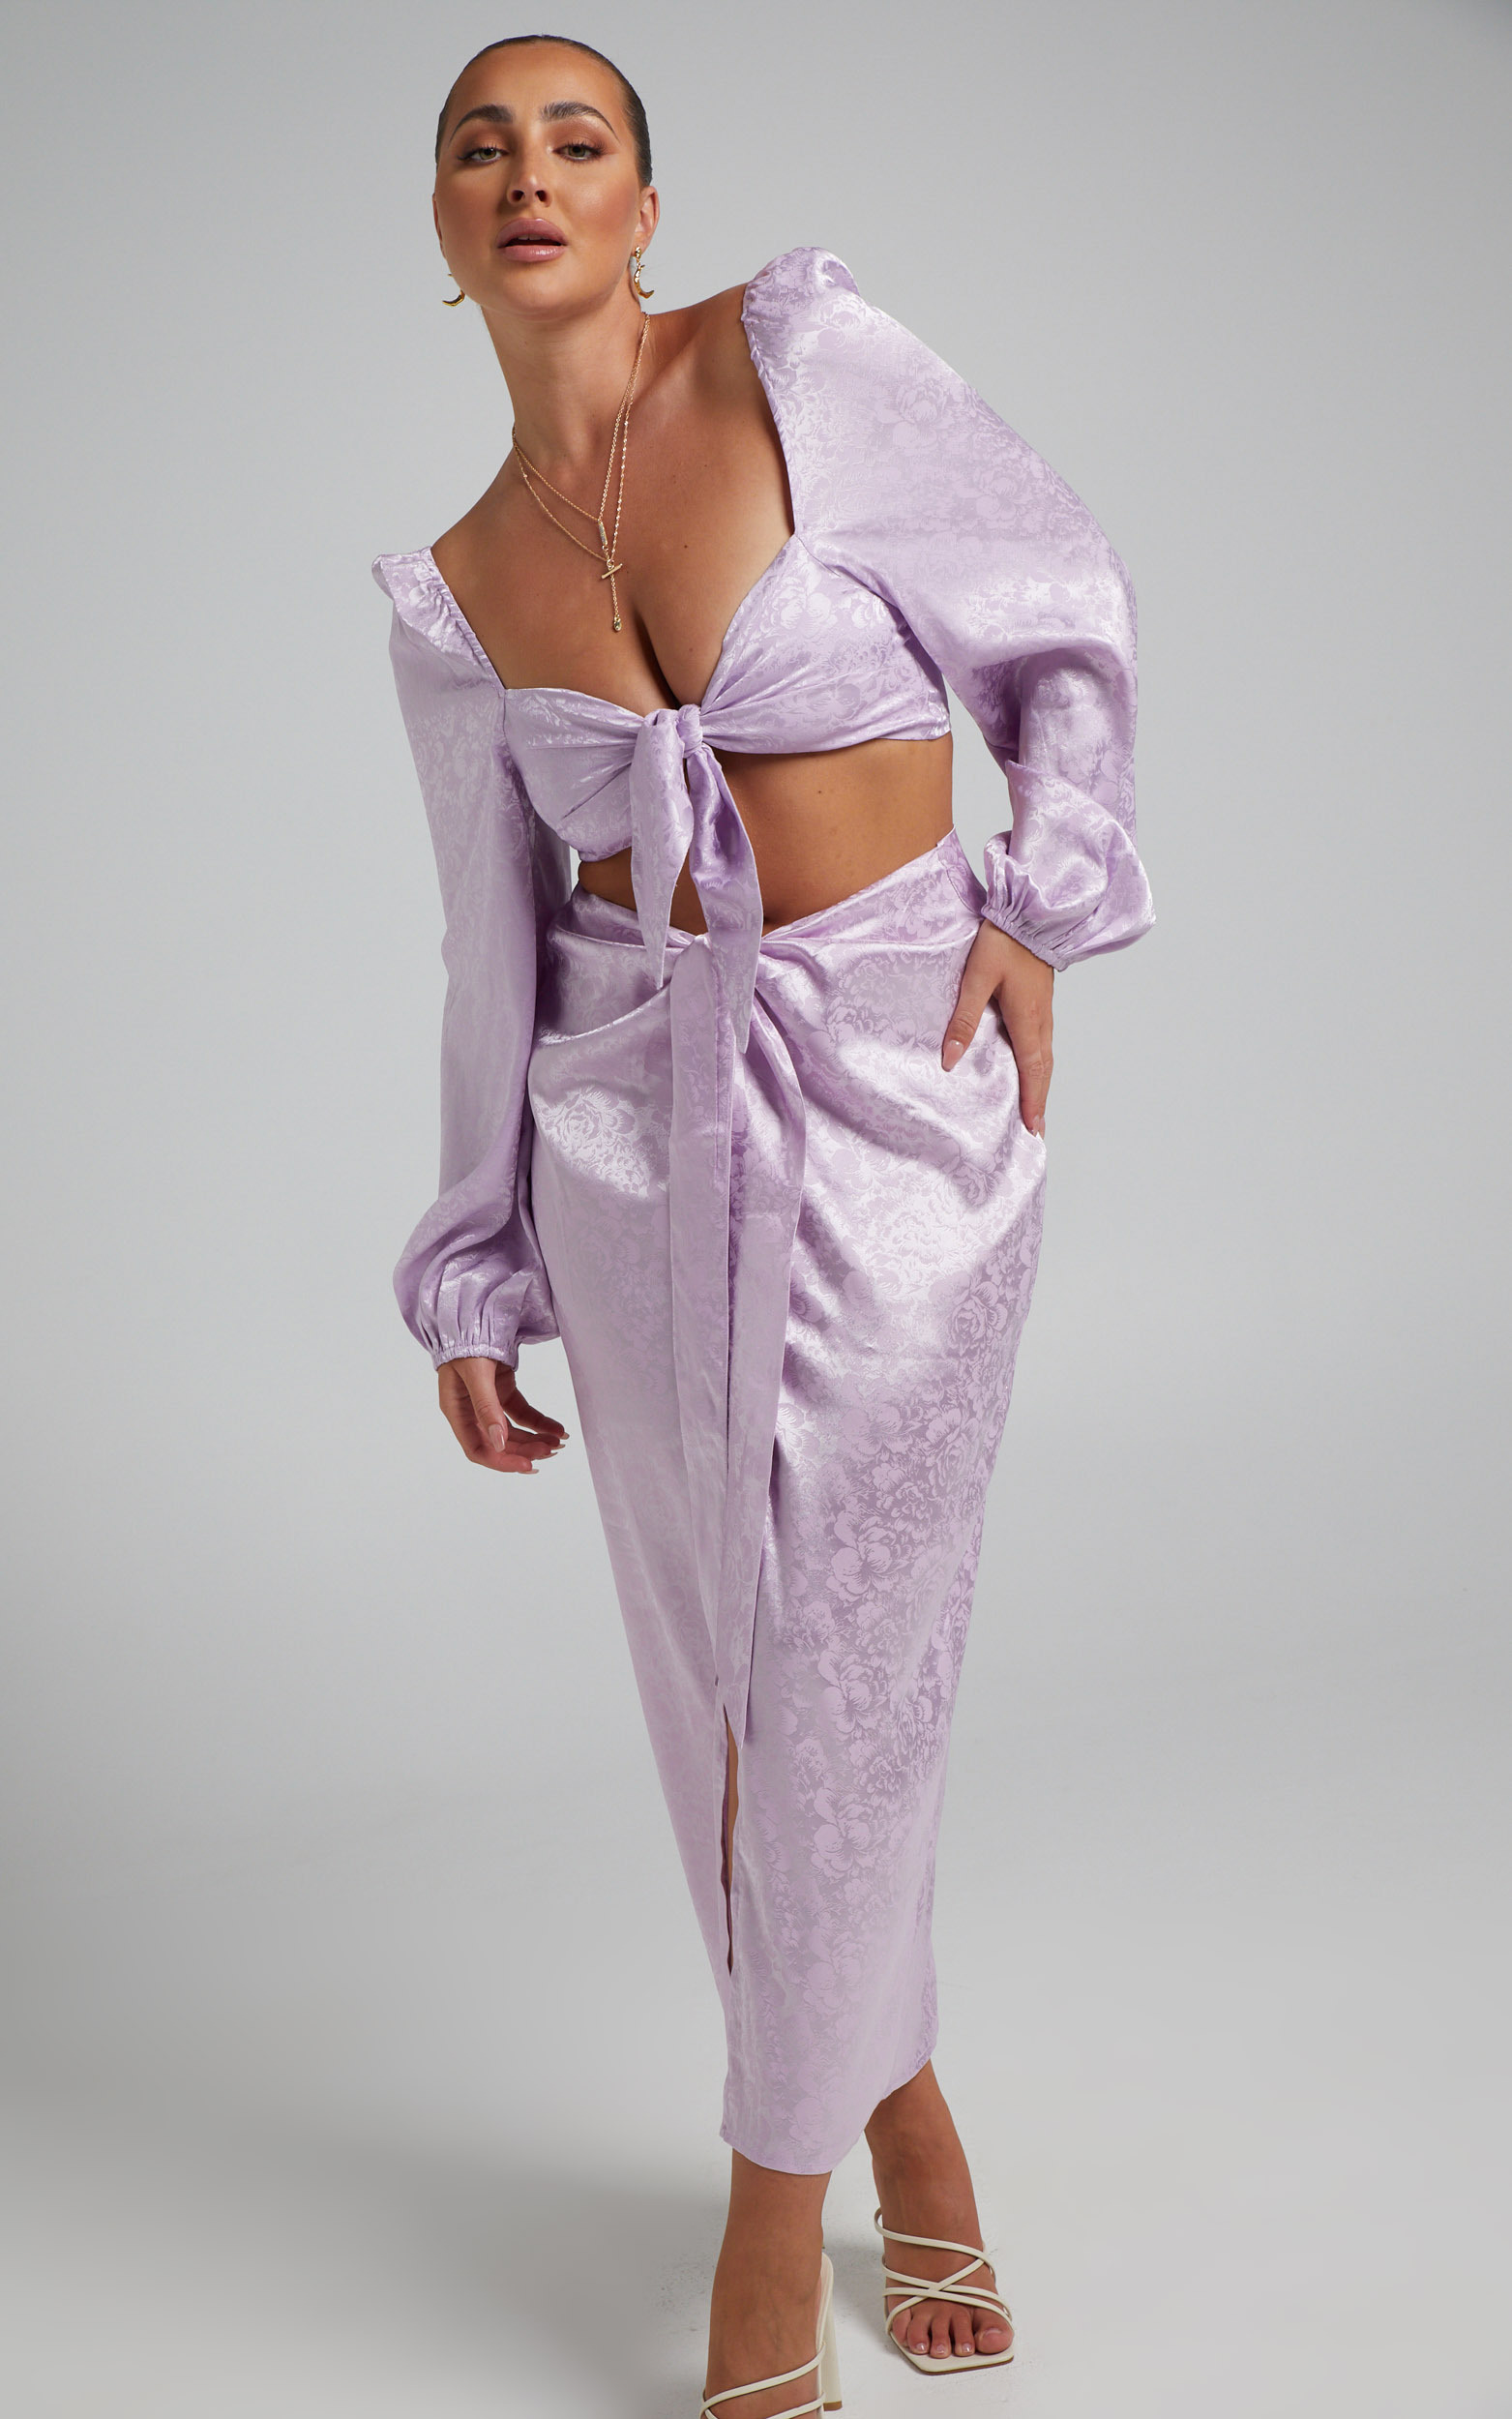 RUNAWAY THE LABEL - ROXIE MIDI SKIRT in Lilac - L, PRP1, hi-res image number null